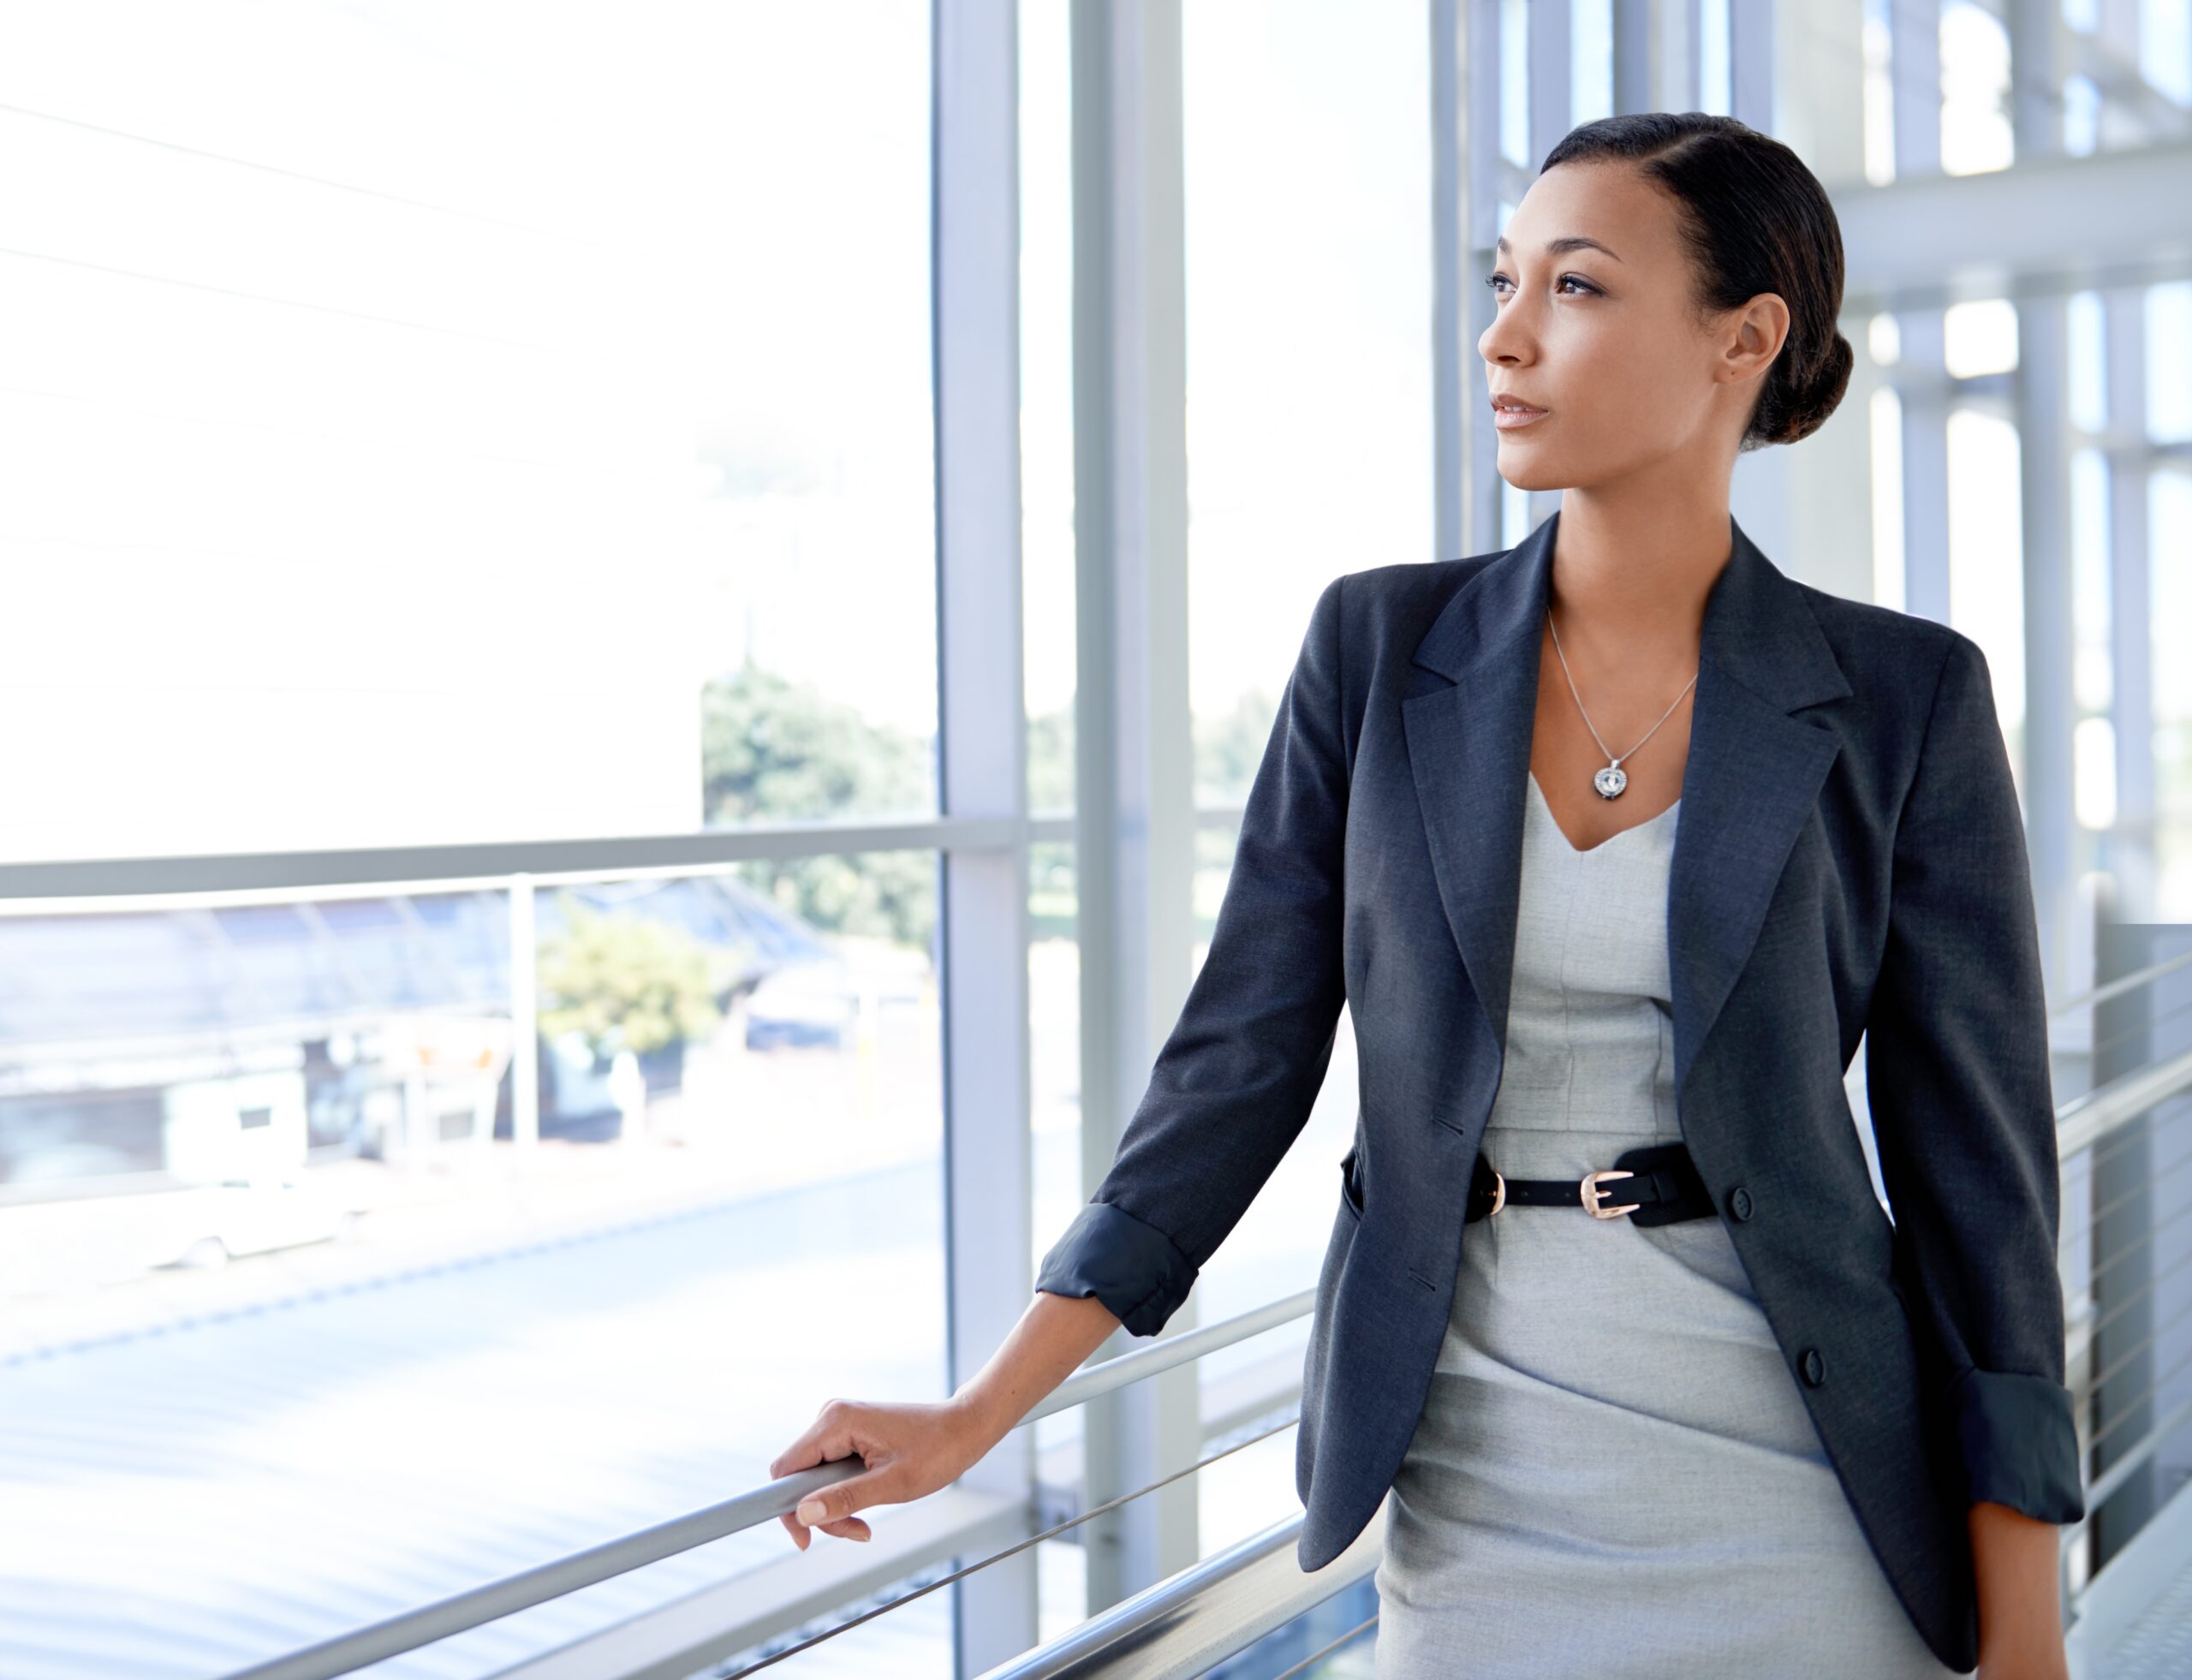 A business woman in a light blue dress and dark blue blazer stares out the window of an office building.